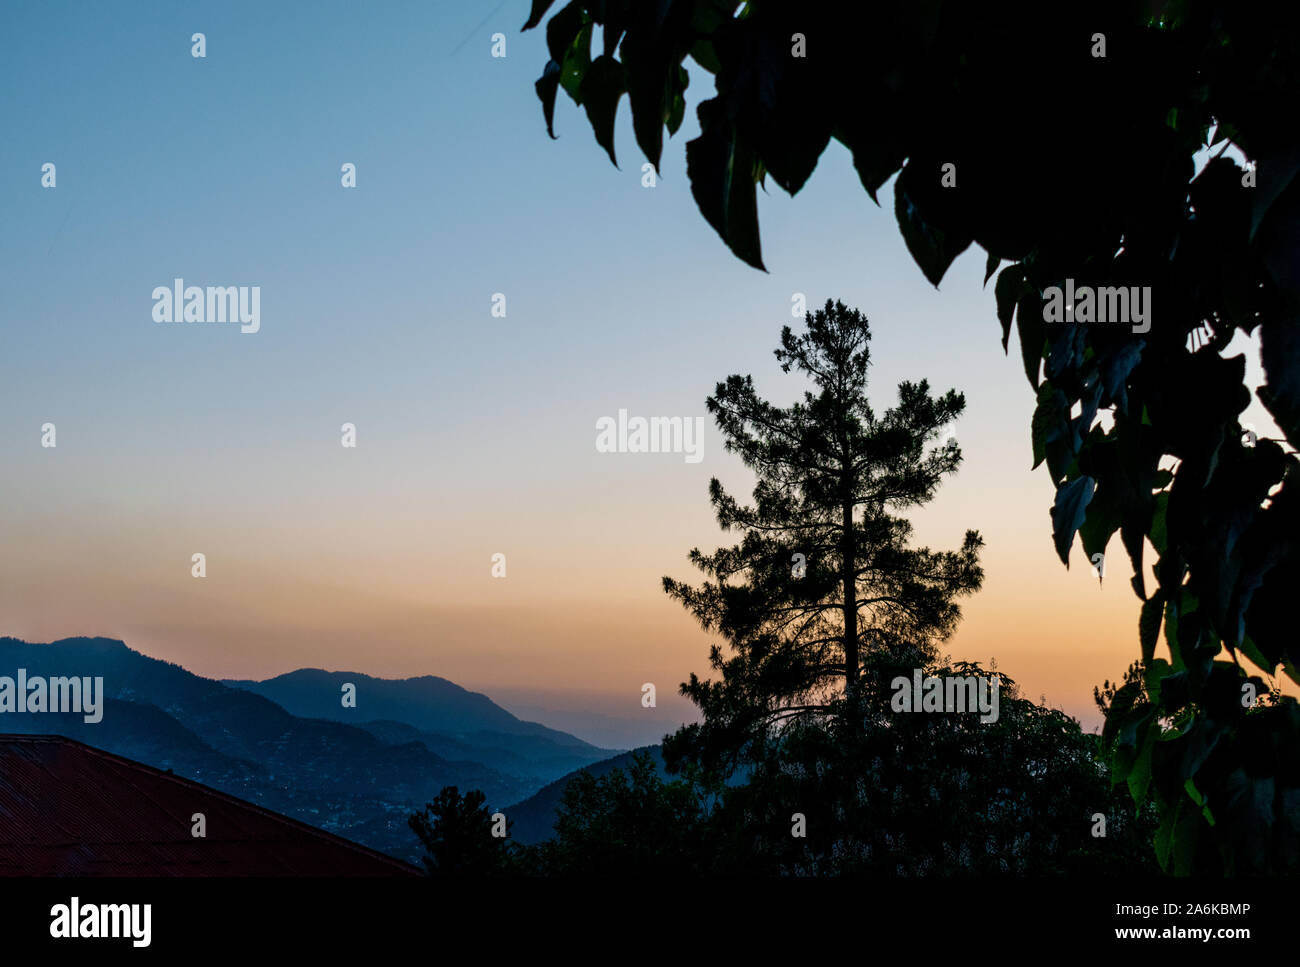 Single tree silhouette sunrise at dawn in mountains Stock Photo